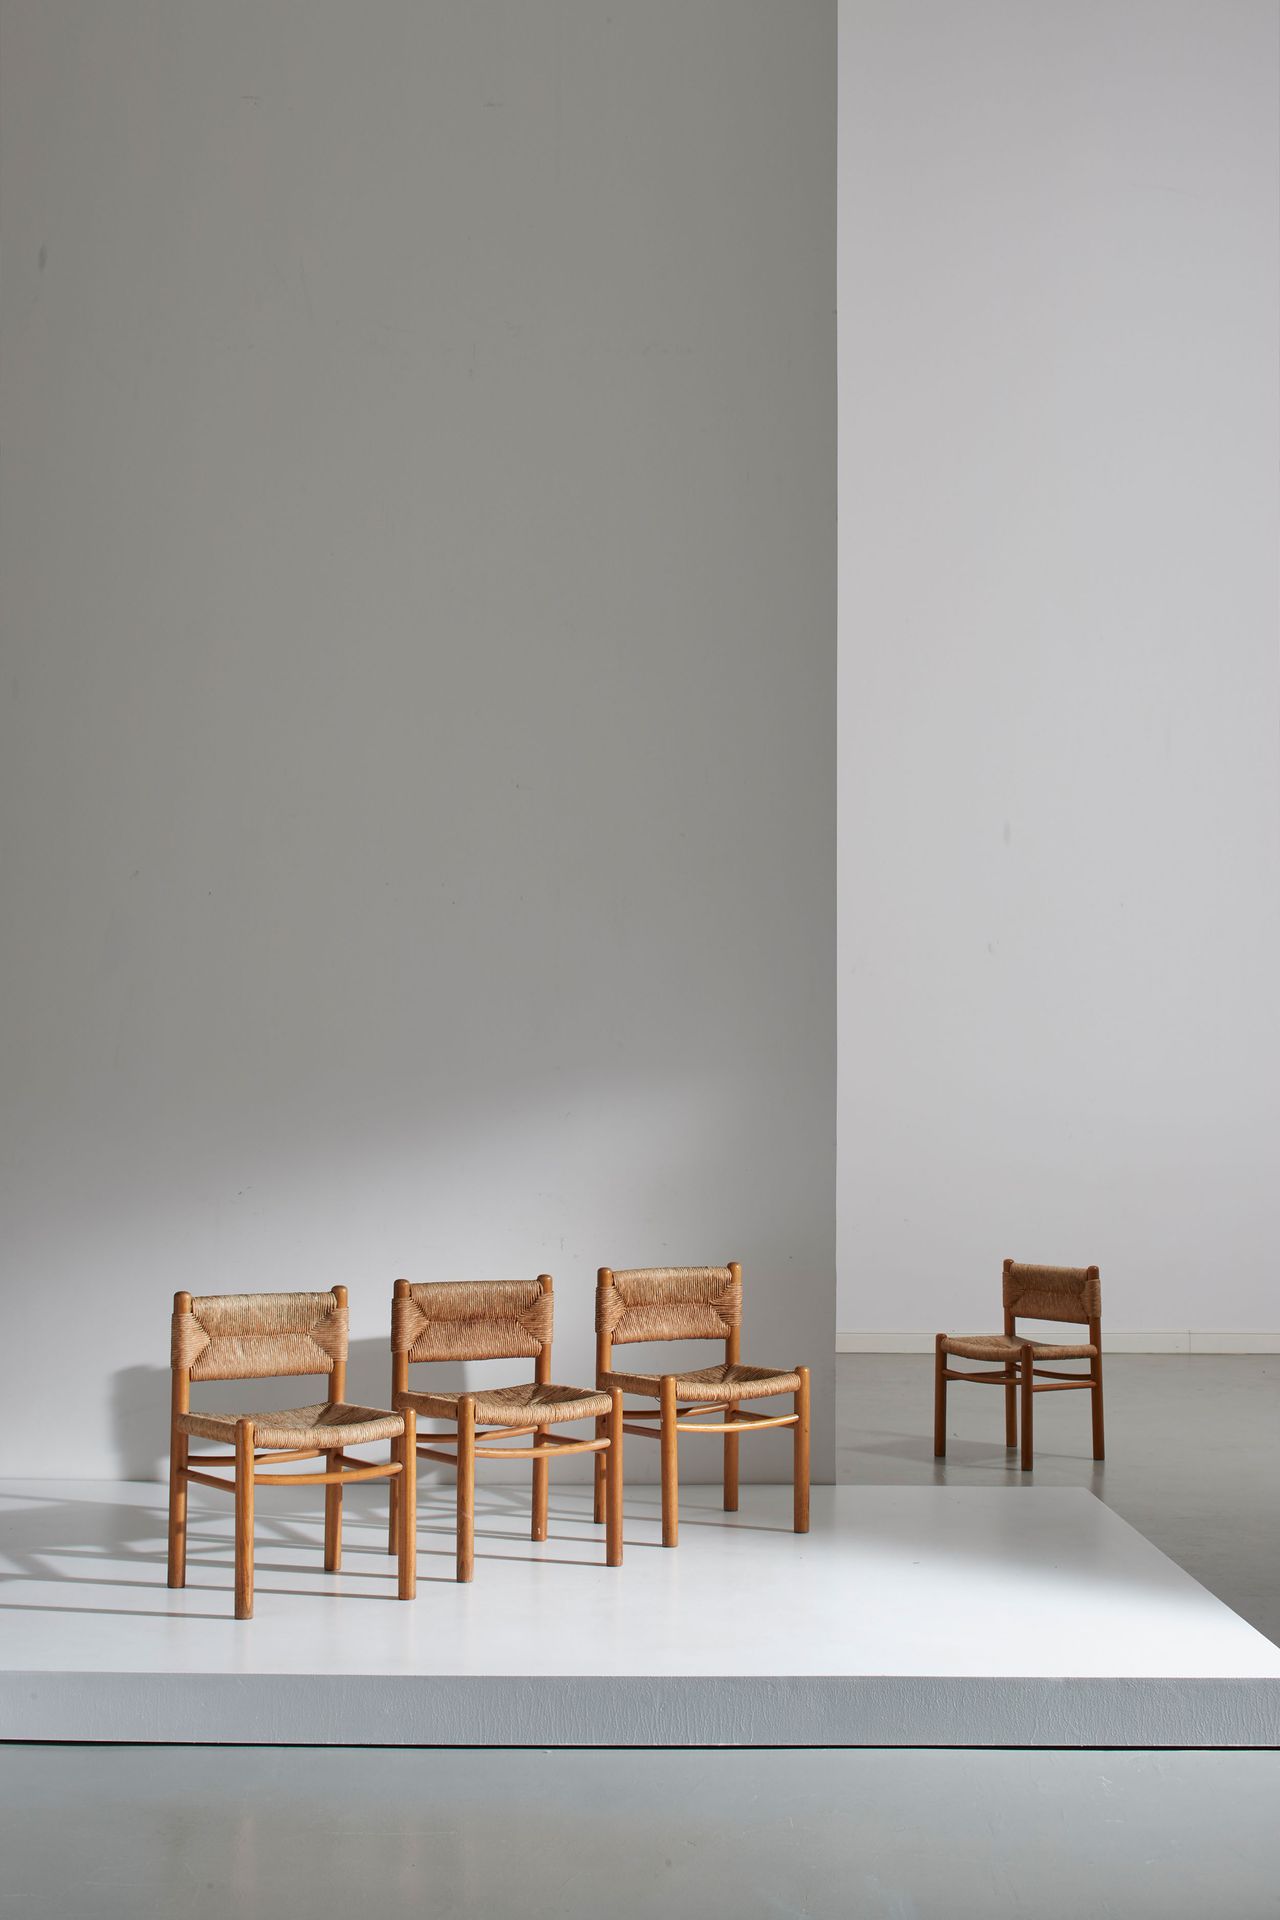 CHARLOTTE PERRIAND (ATTRIB. A) Four chairs. Conifer wood, woven river straw. Fra&hellip;